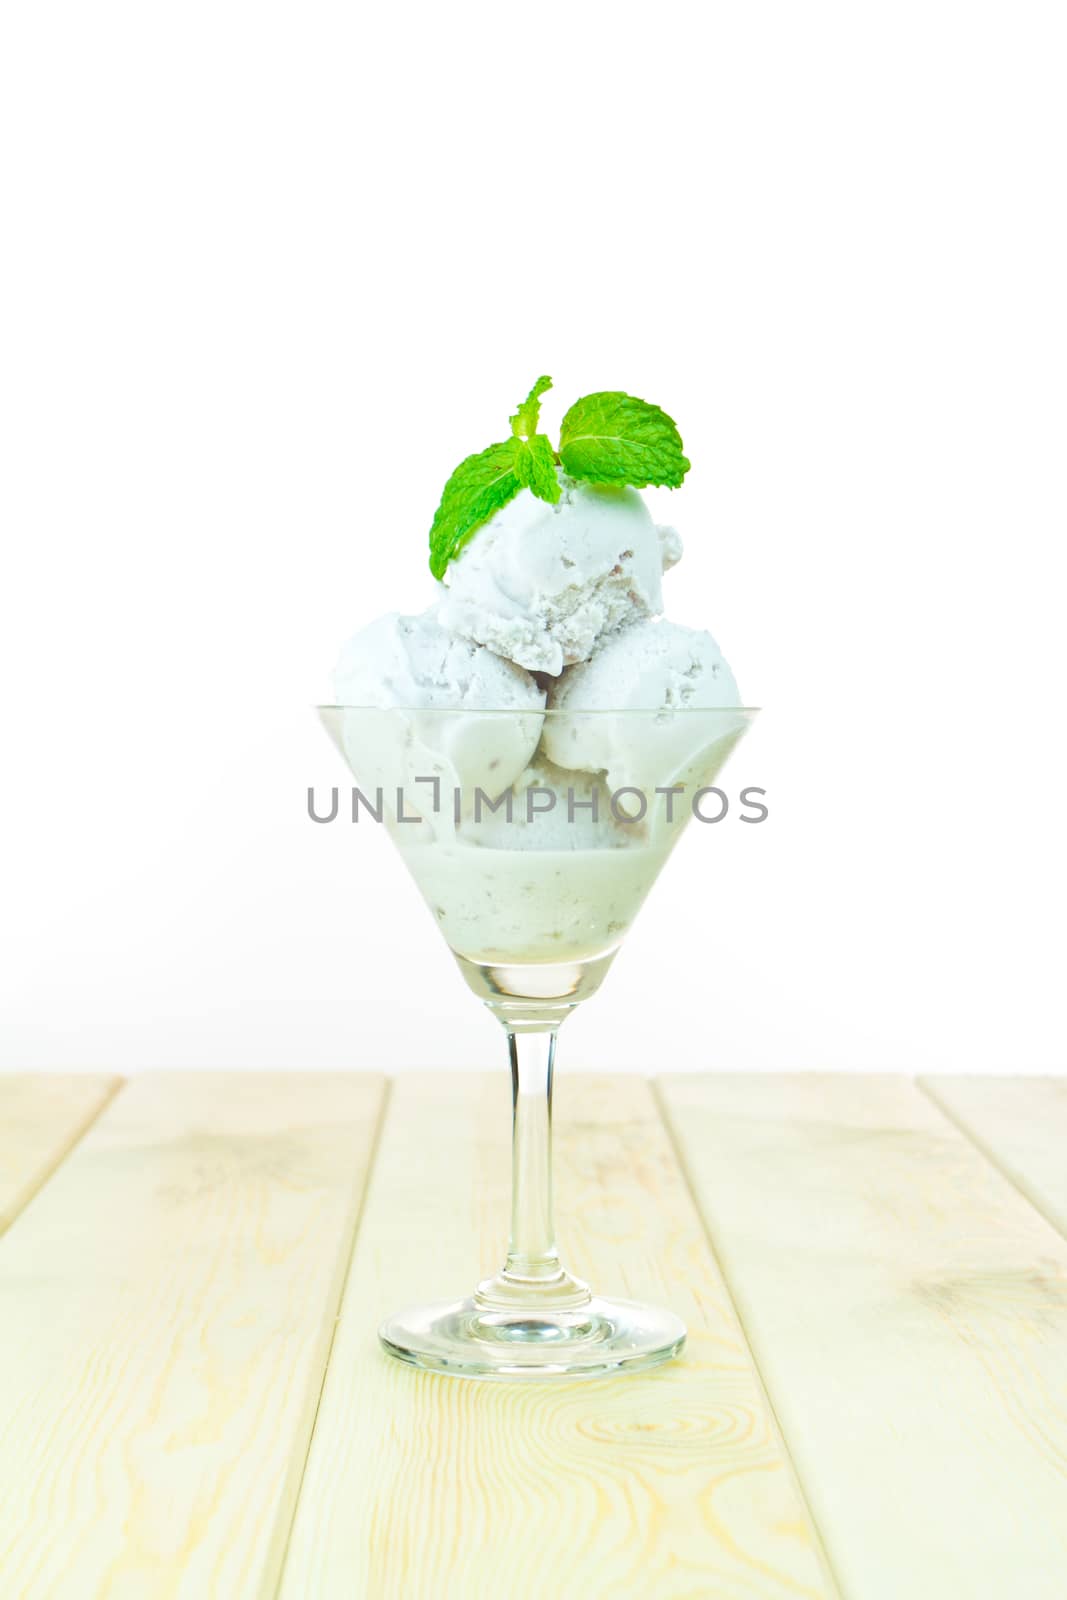 Coconut ice cream with mint in cup on wood 